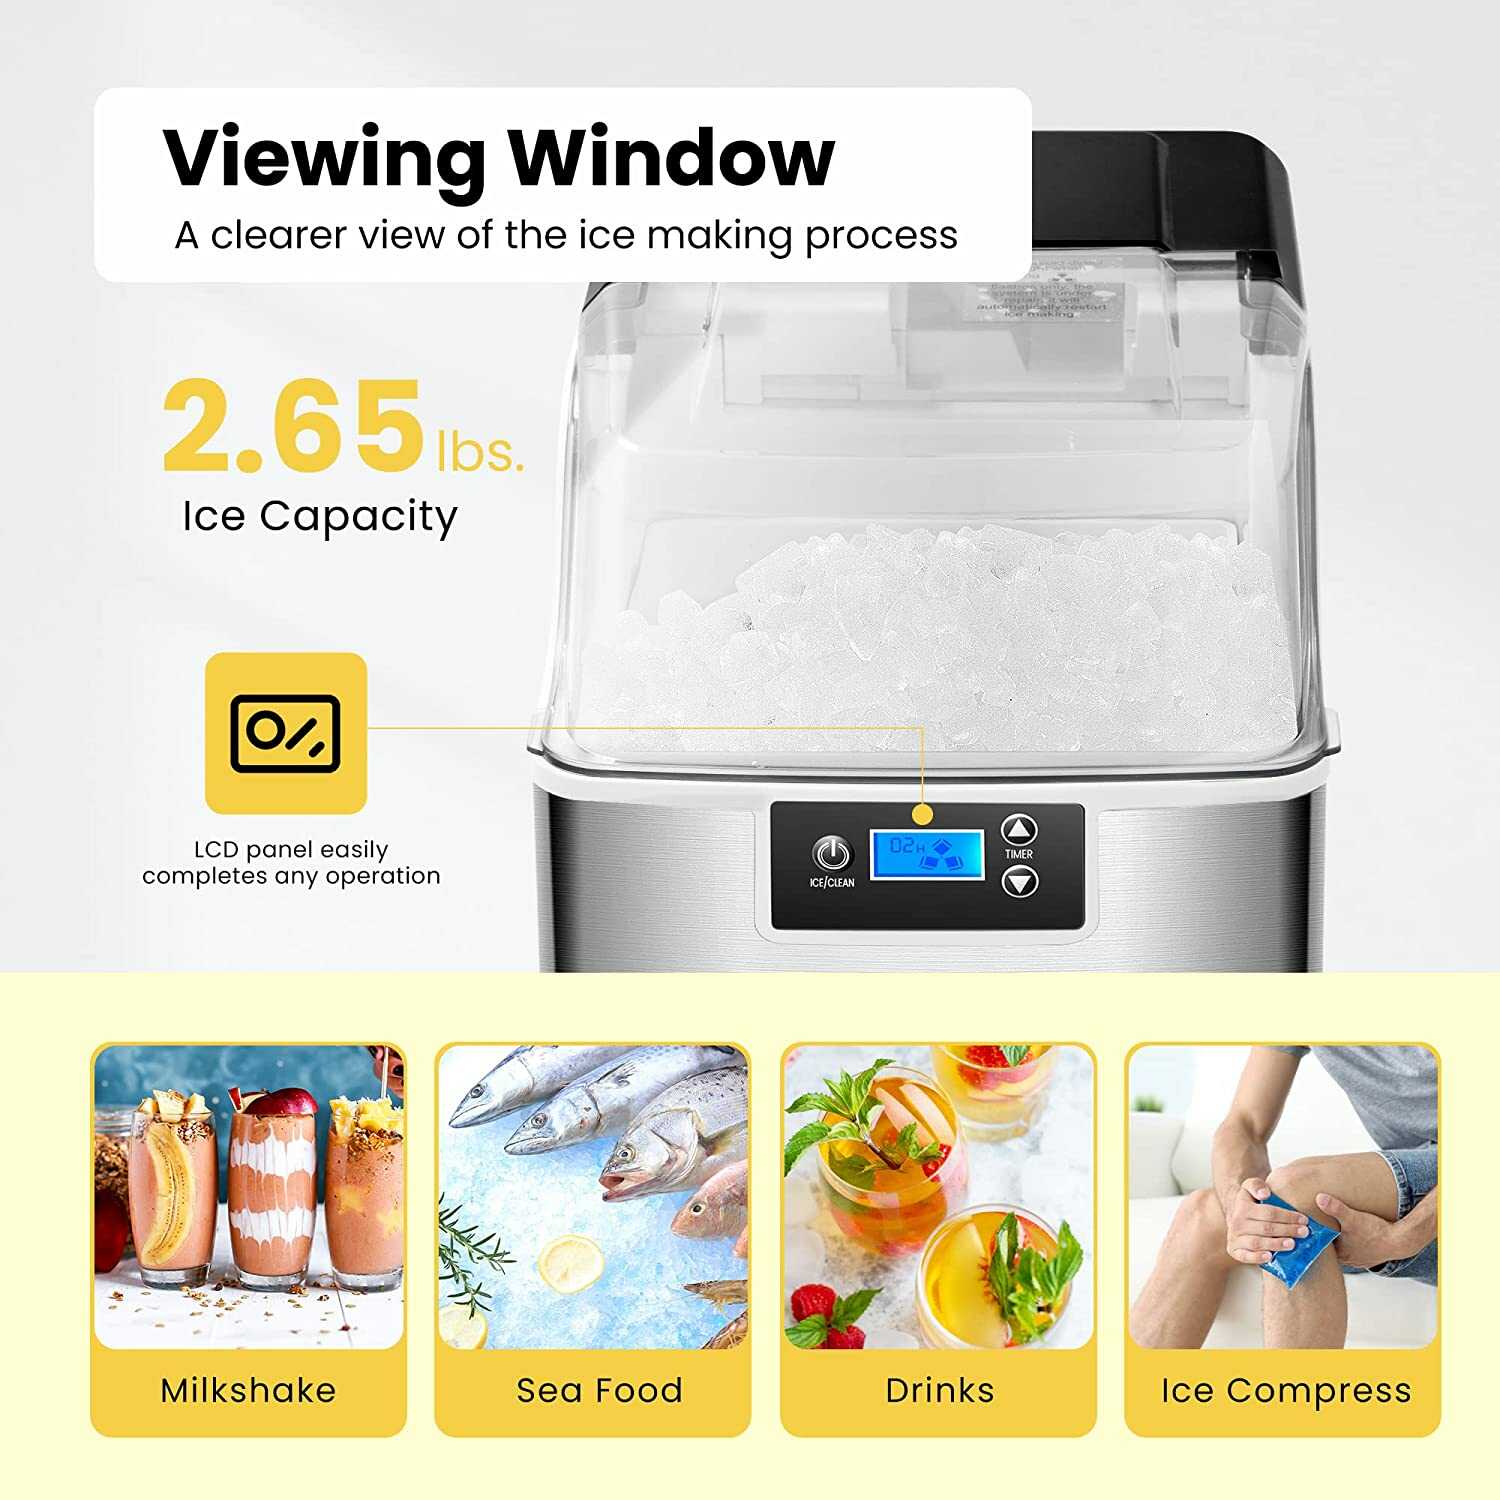 VIVOHOME Electric Portable Countertop Chewable Nugget Ice Cube